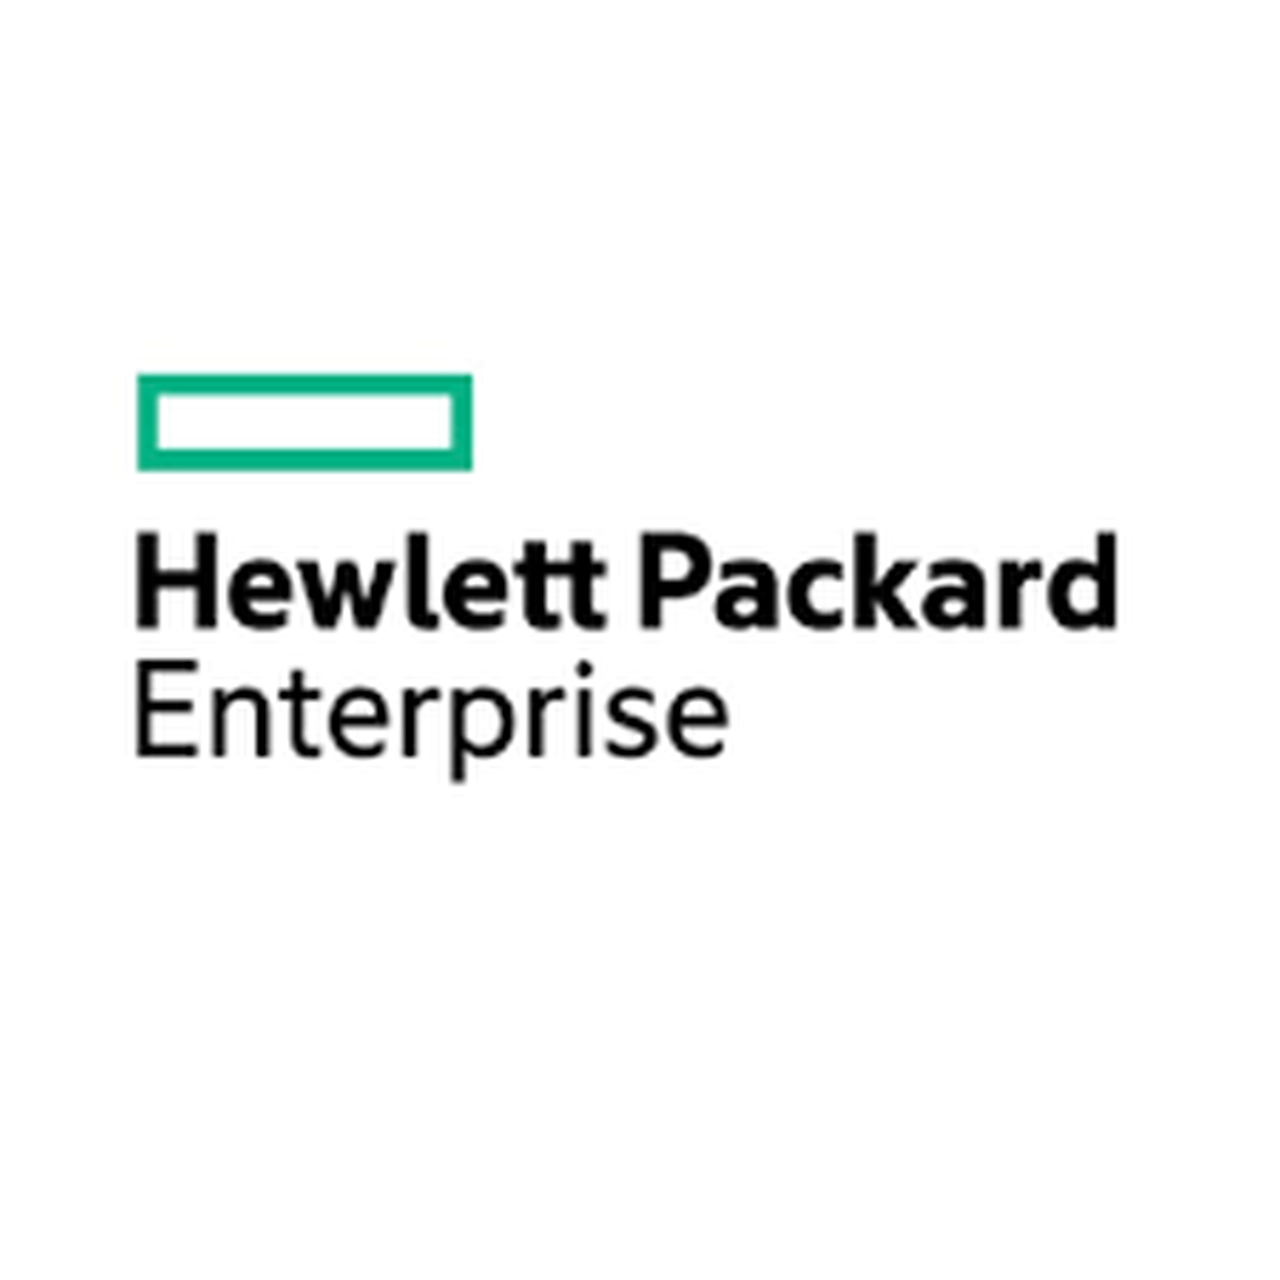 HPE Aruba IAP-324 (JP) Instant 4x4:4 11ac AP (Sourcing) - HPE Discontinued Product)